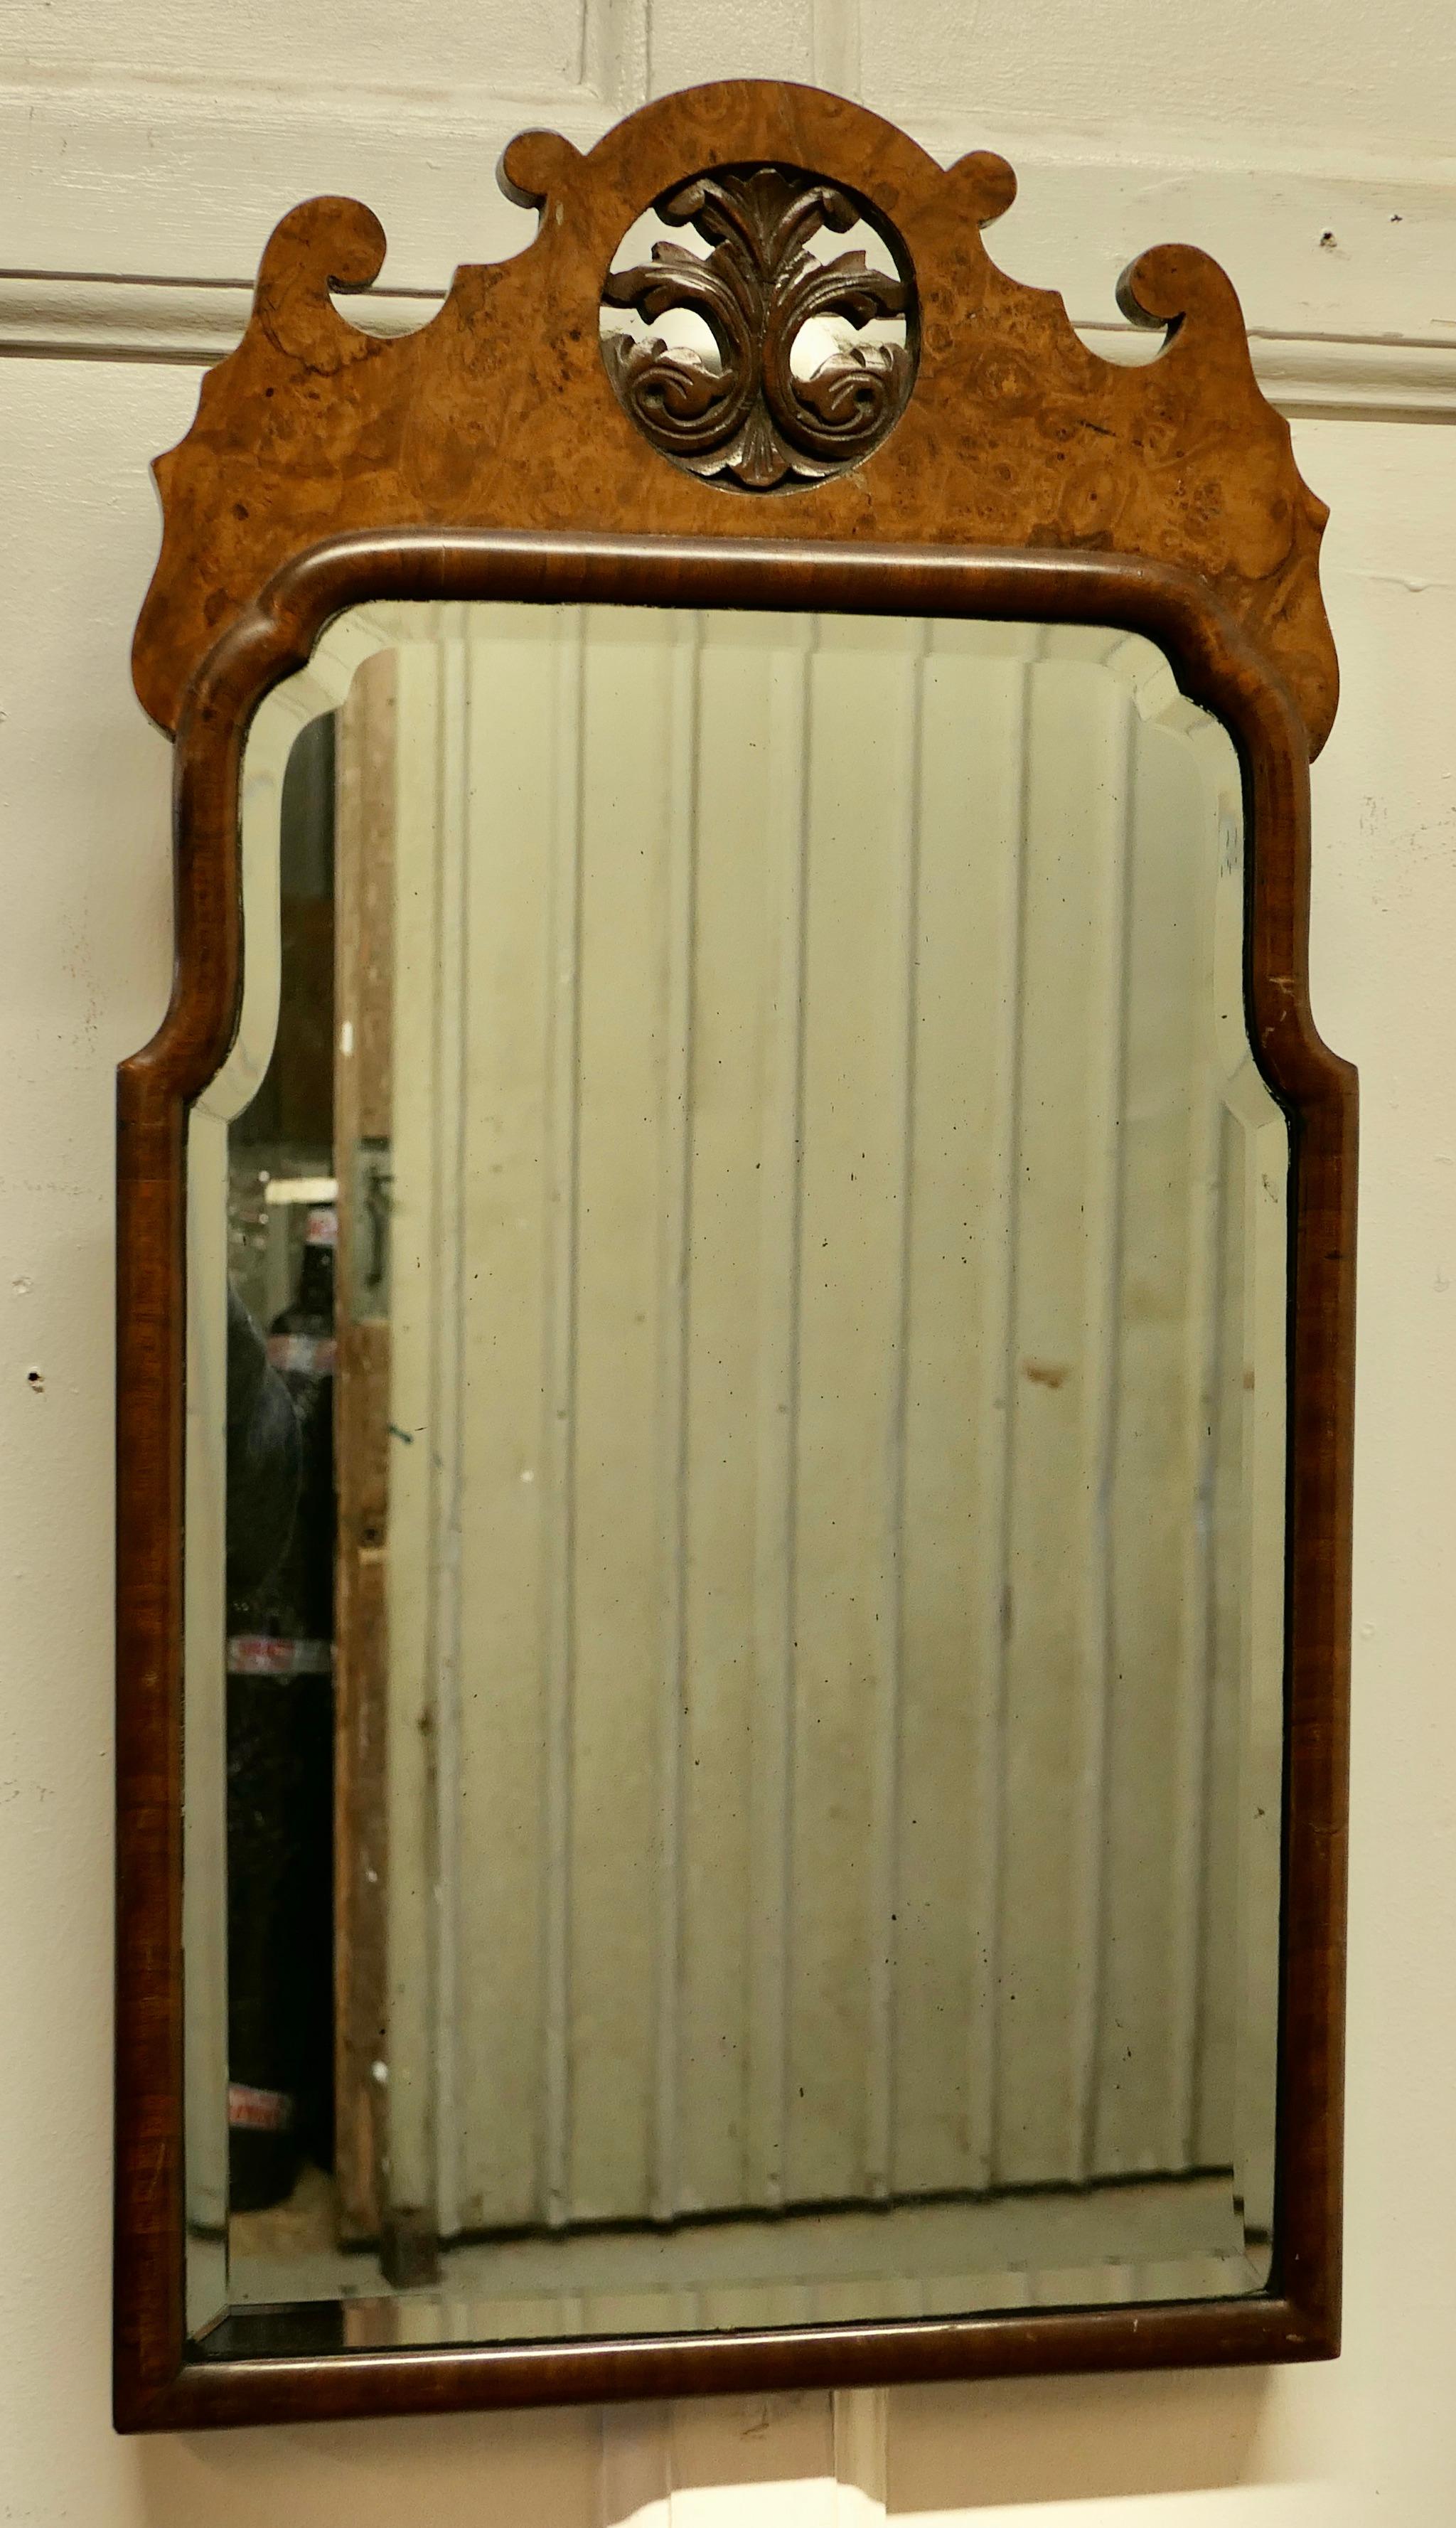 Fine quality burr walnut wall hanging mirror.

Here we have a superb wall mirror with a wonderful figured walnut pelmet inset with carved acanthus leaves in the centre.
This is a charming Period piece, unusually shaped as is the bevelled